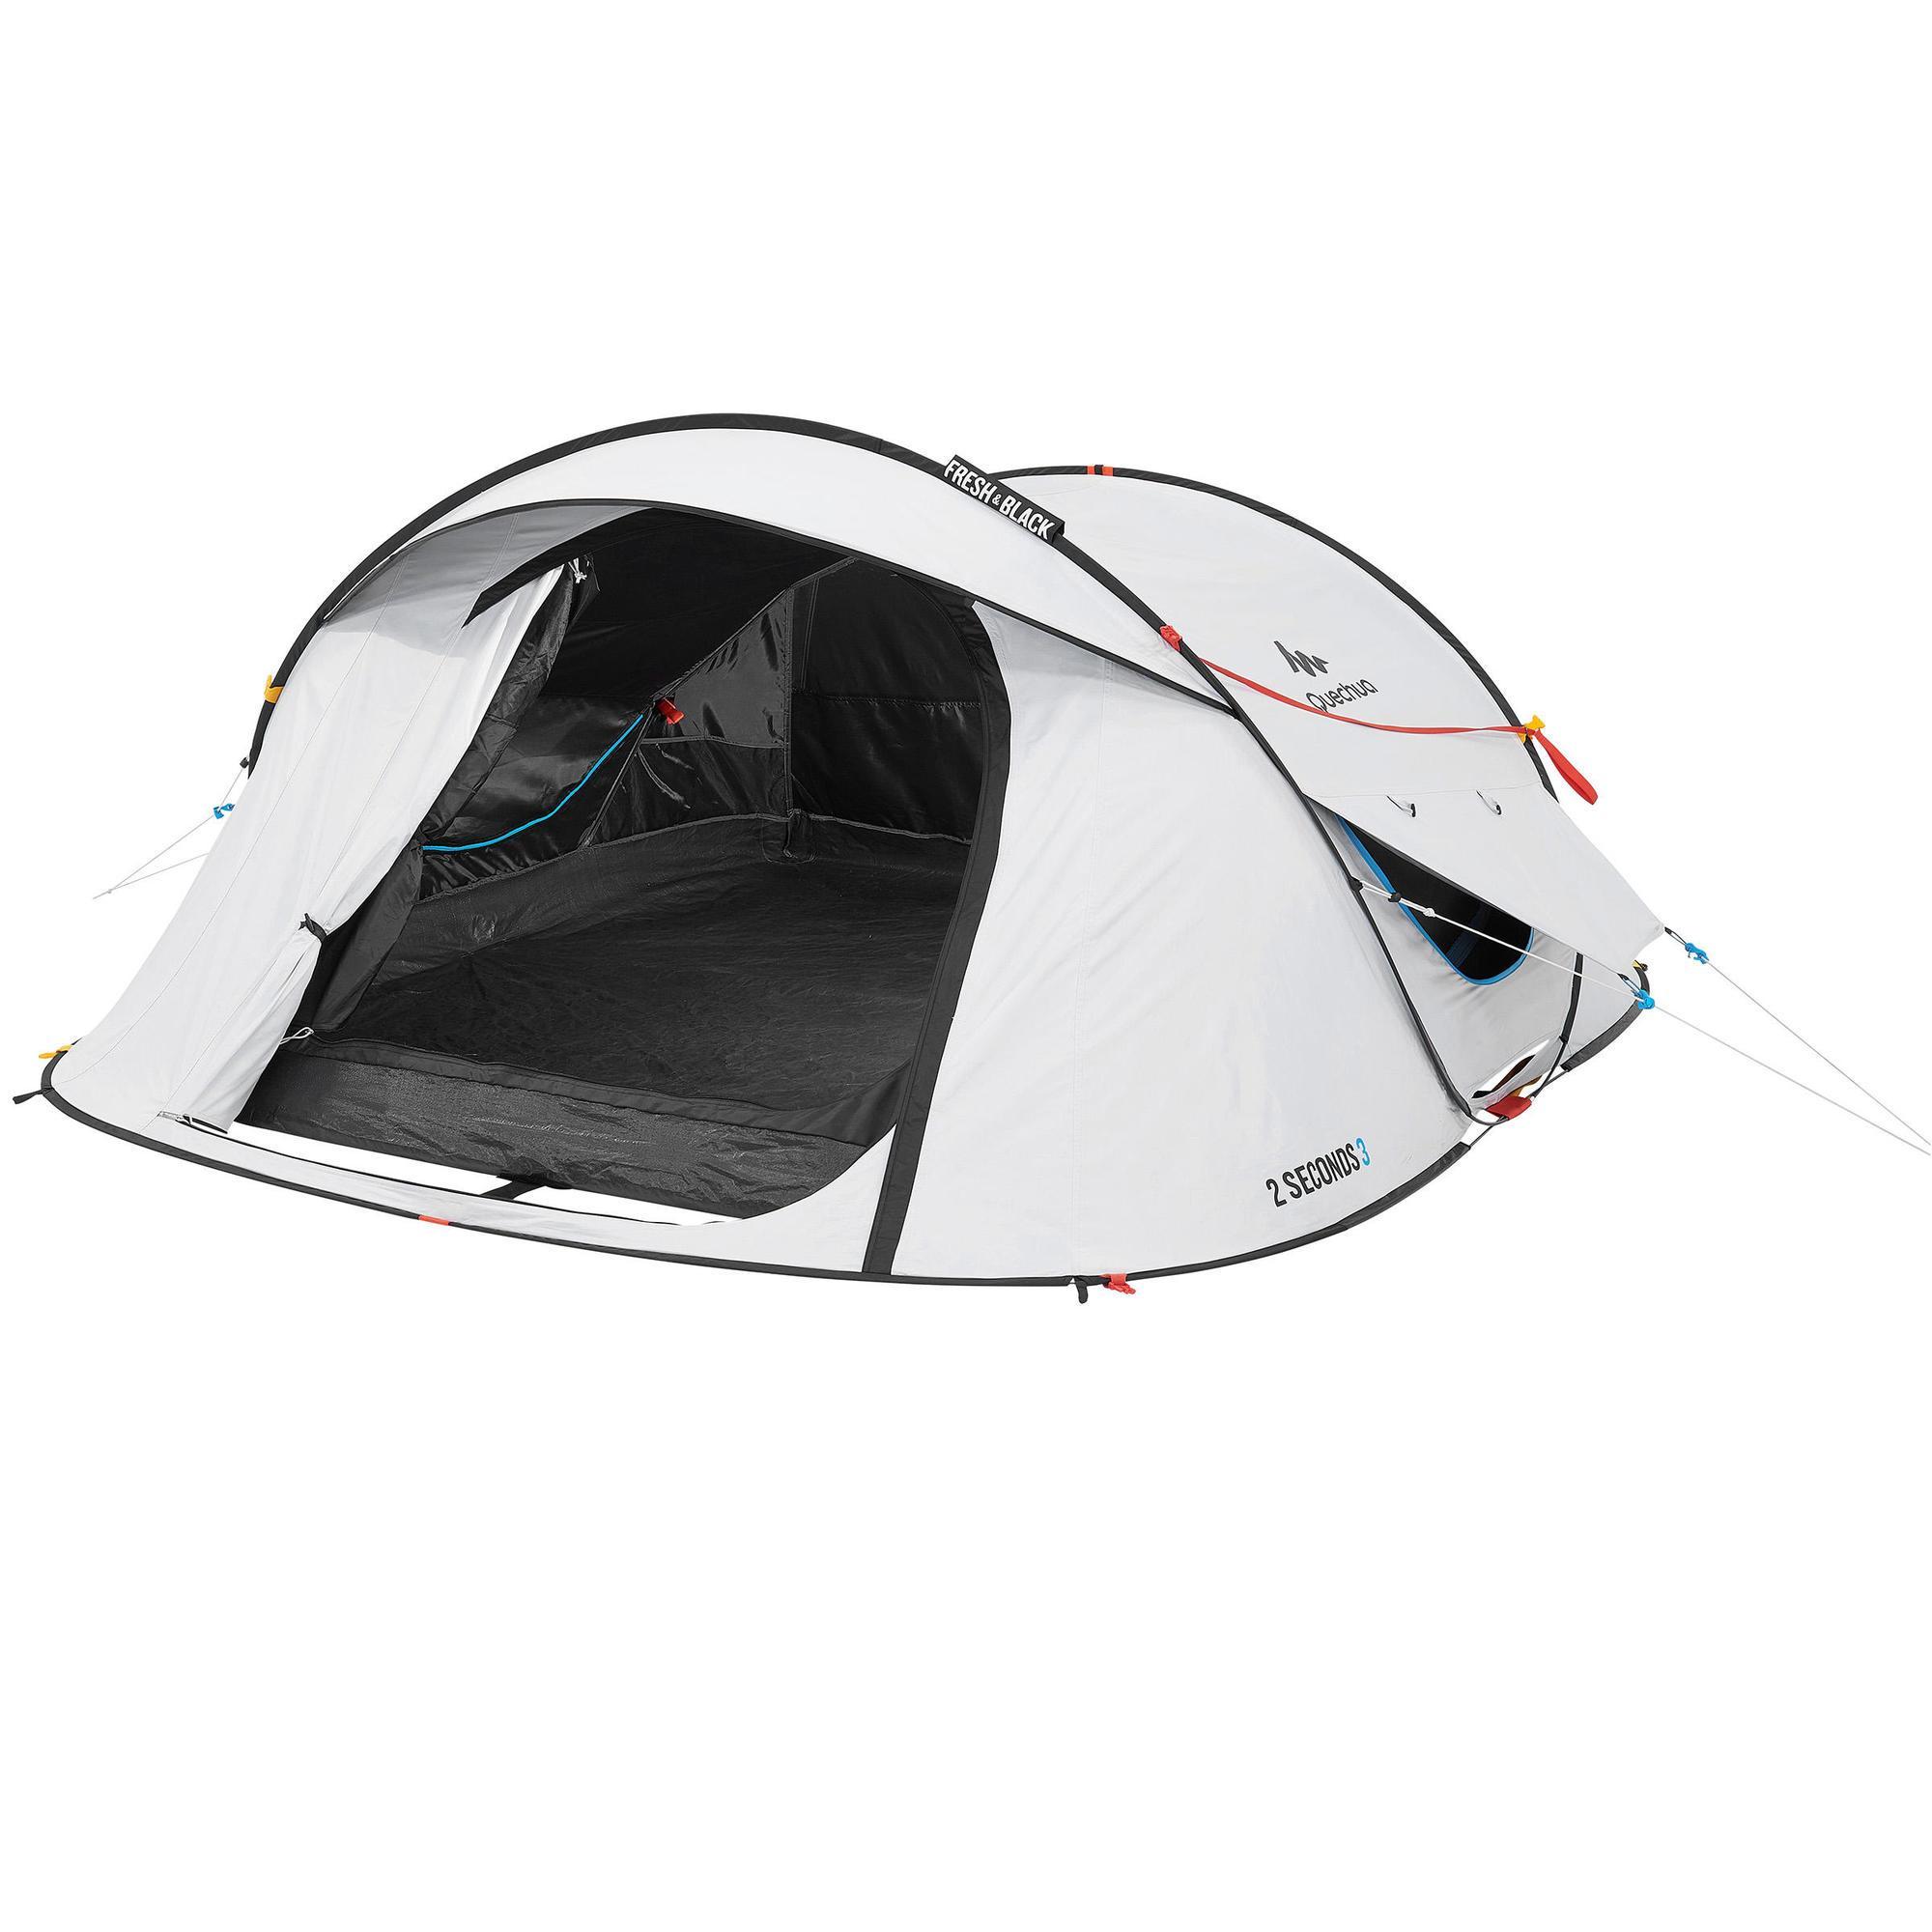 2 person pop up tent